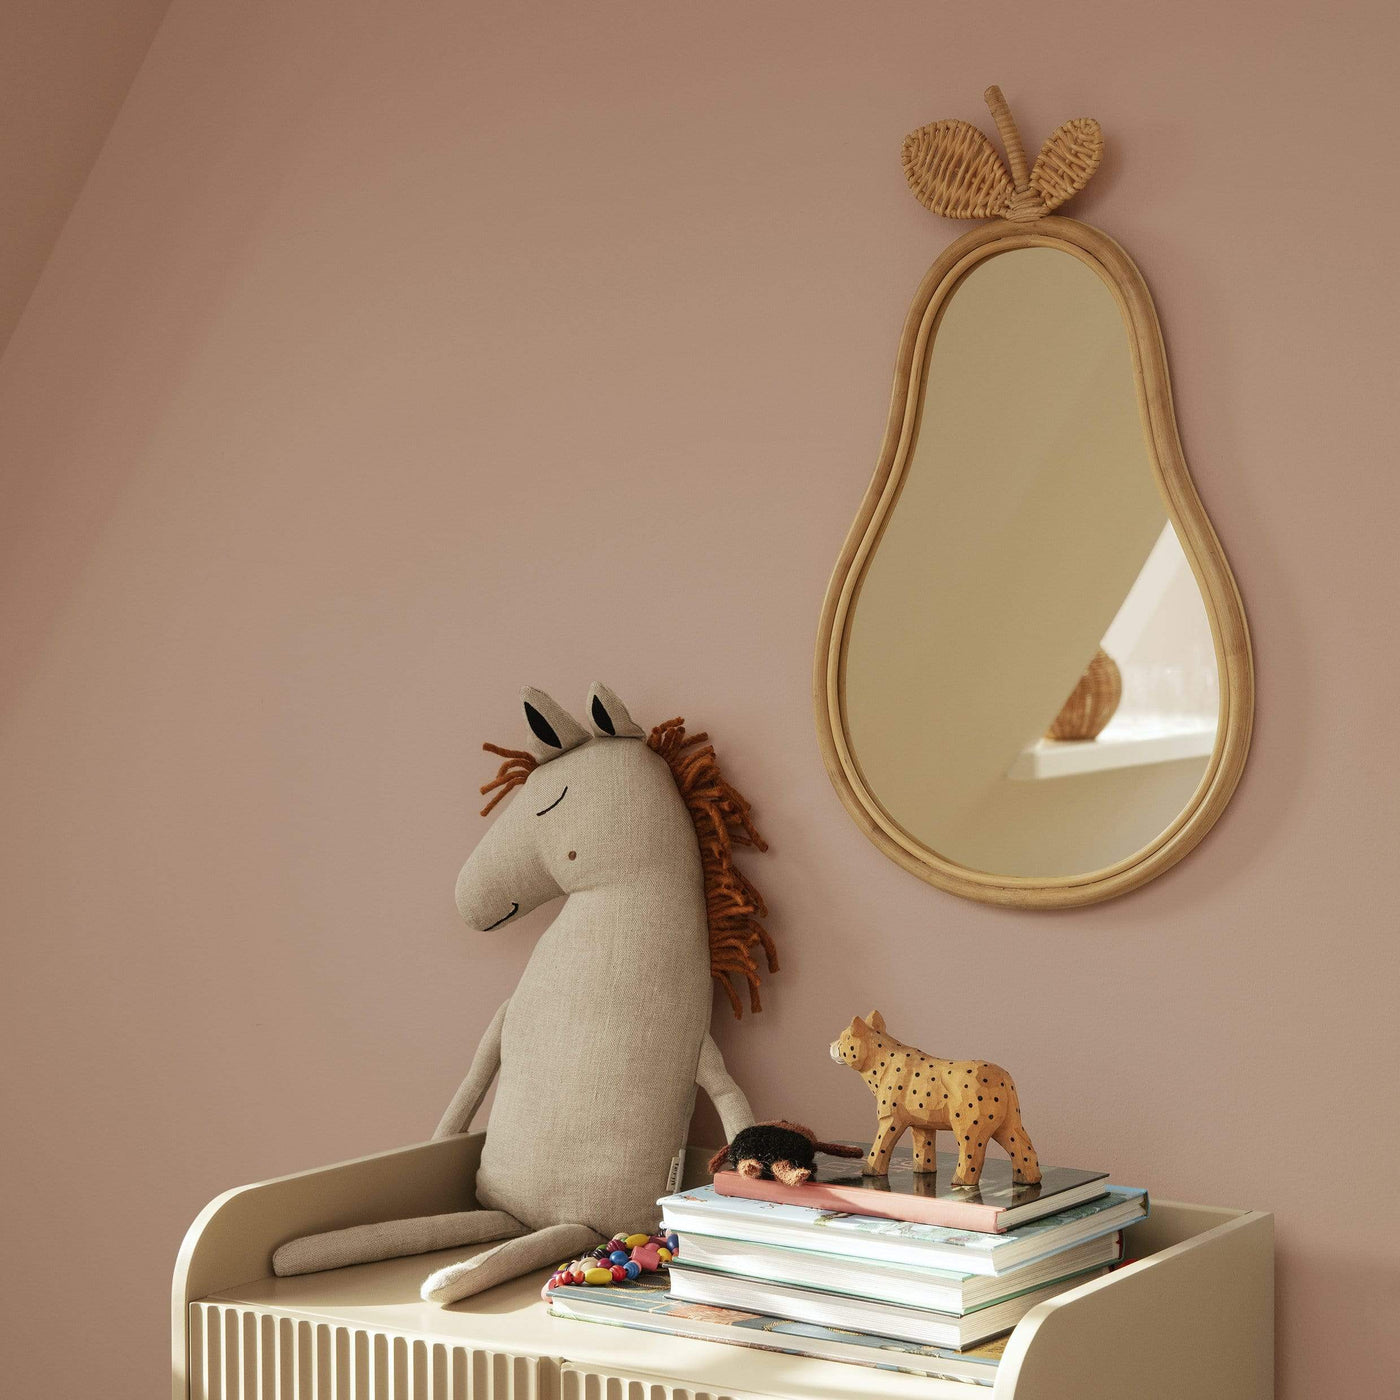 Ferm Livings petite pear mirror has a bamboo & rattan frame. Bring a natural & playful touch to a kids bedroom. Free UK delivery from someday designs. 